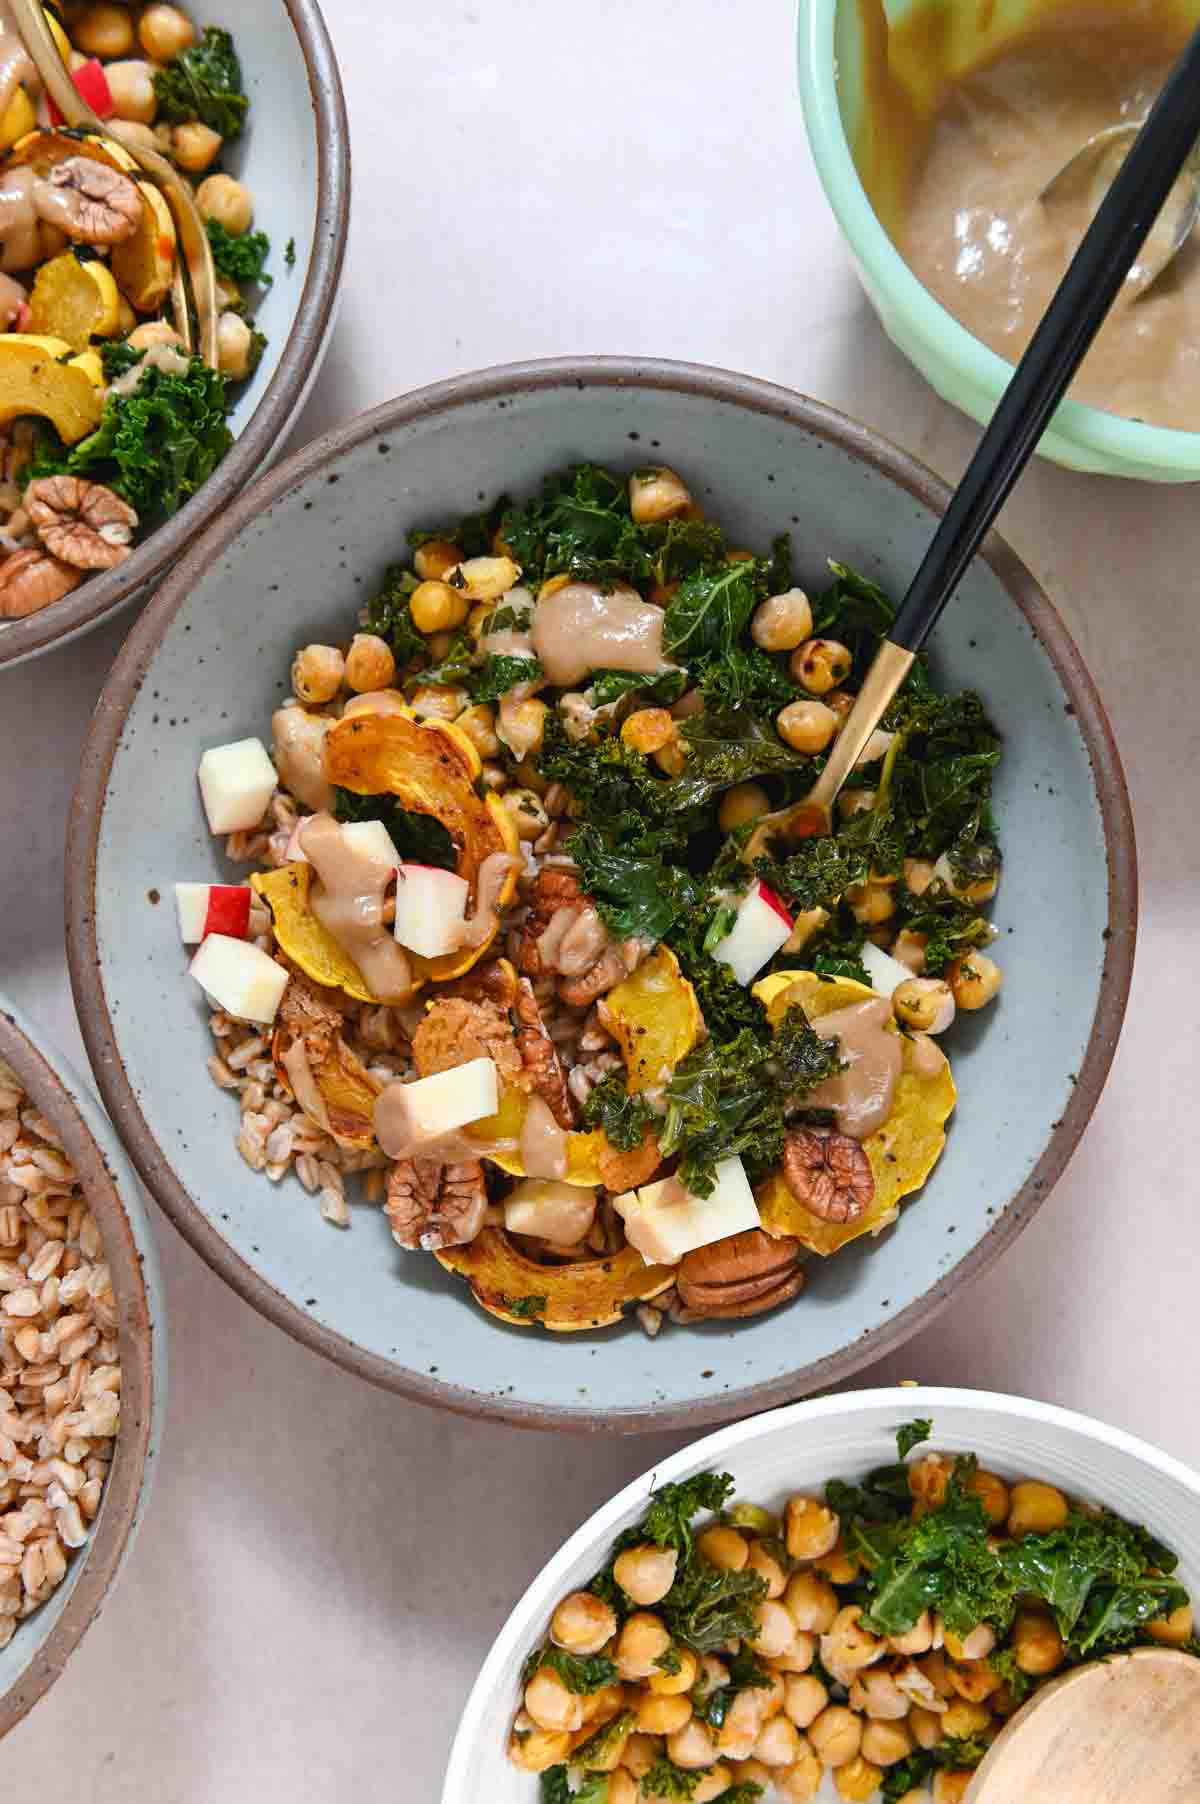 Gray bowl filled with farro, delicata squash, and other grain bowl ingredients with a black handled gold fork.